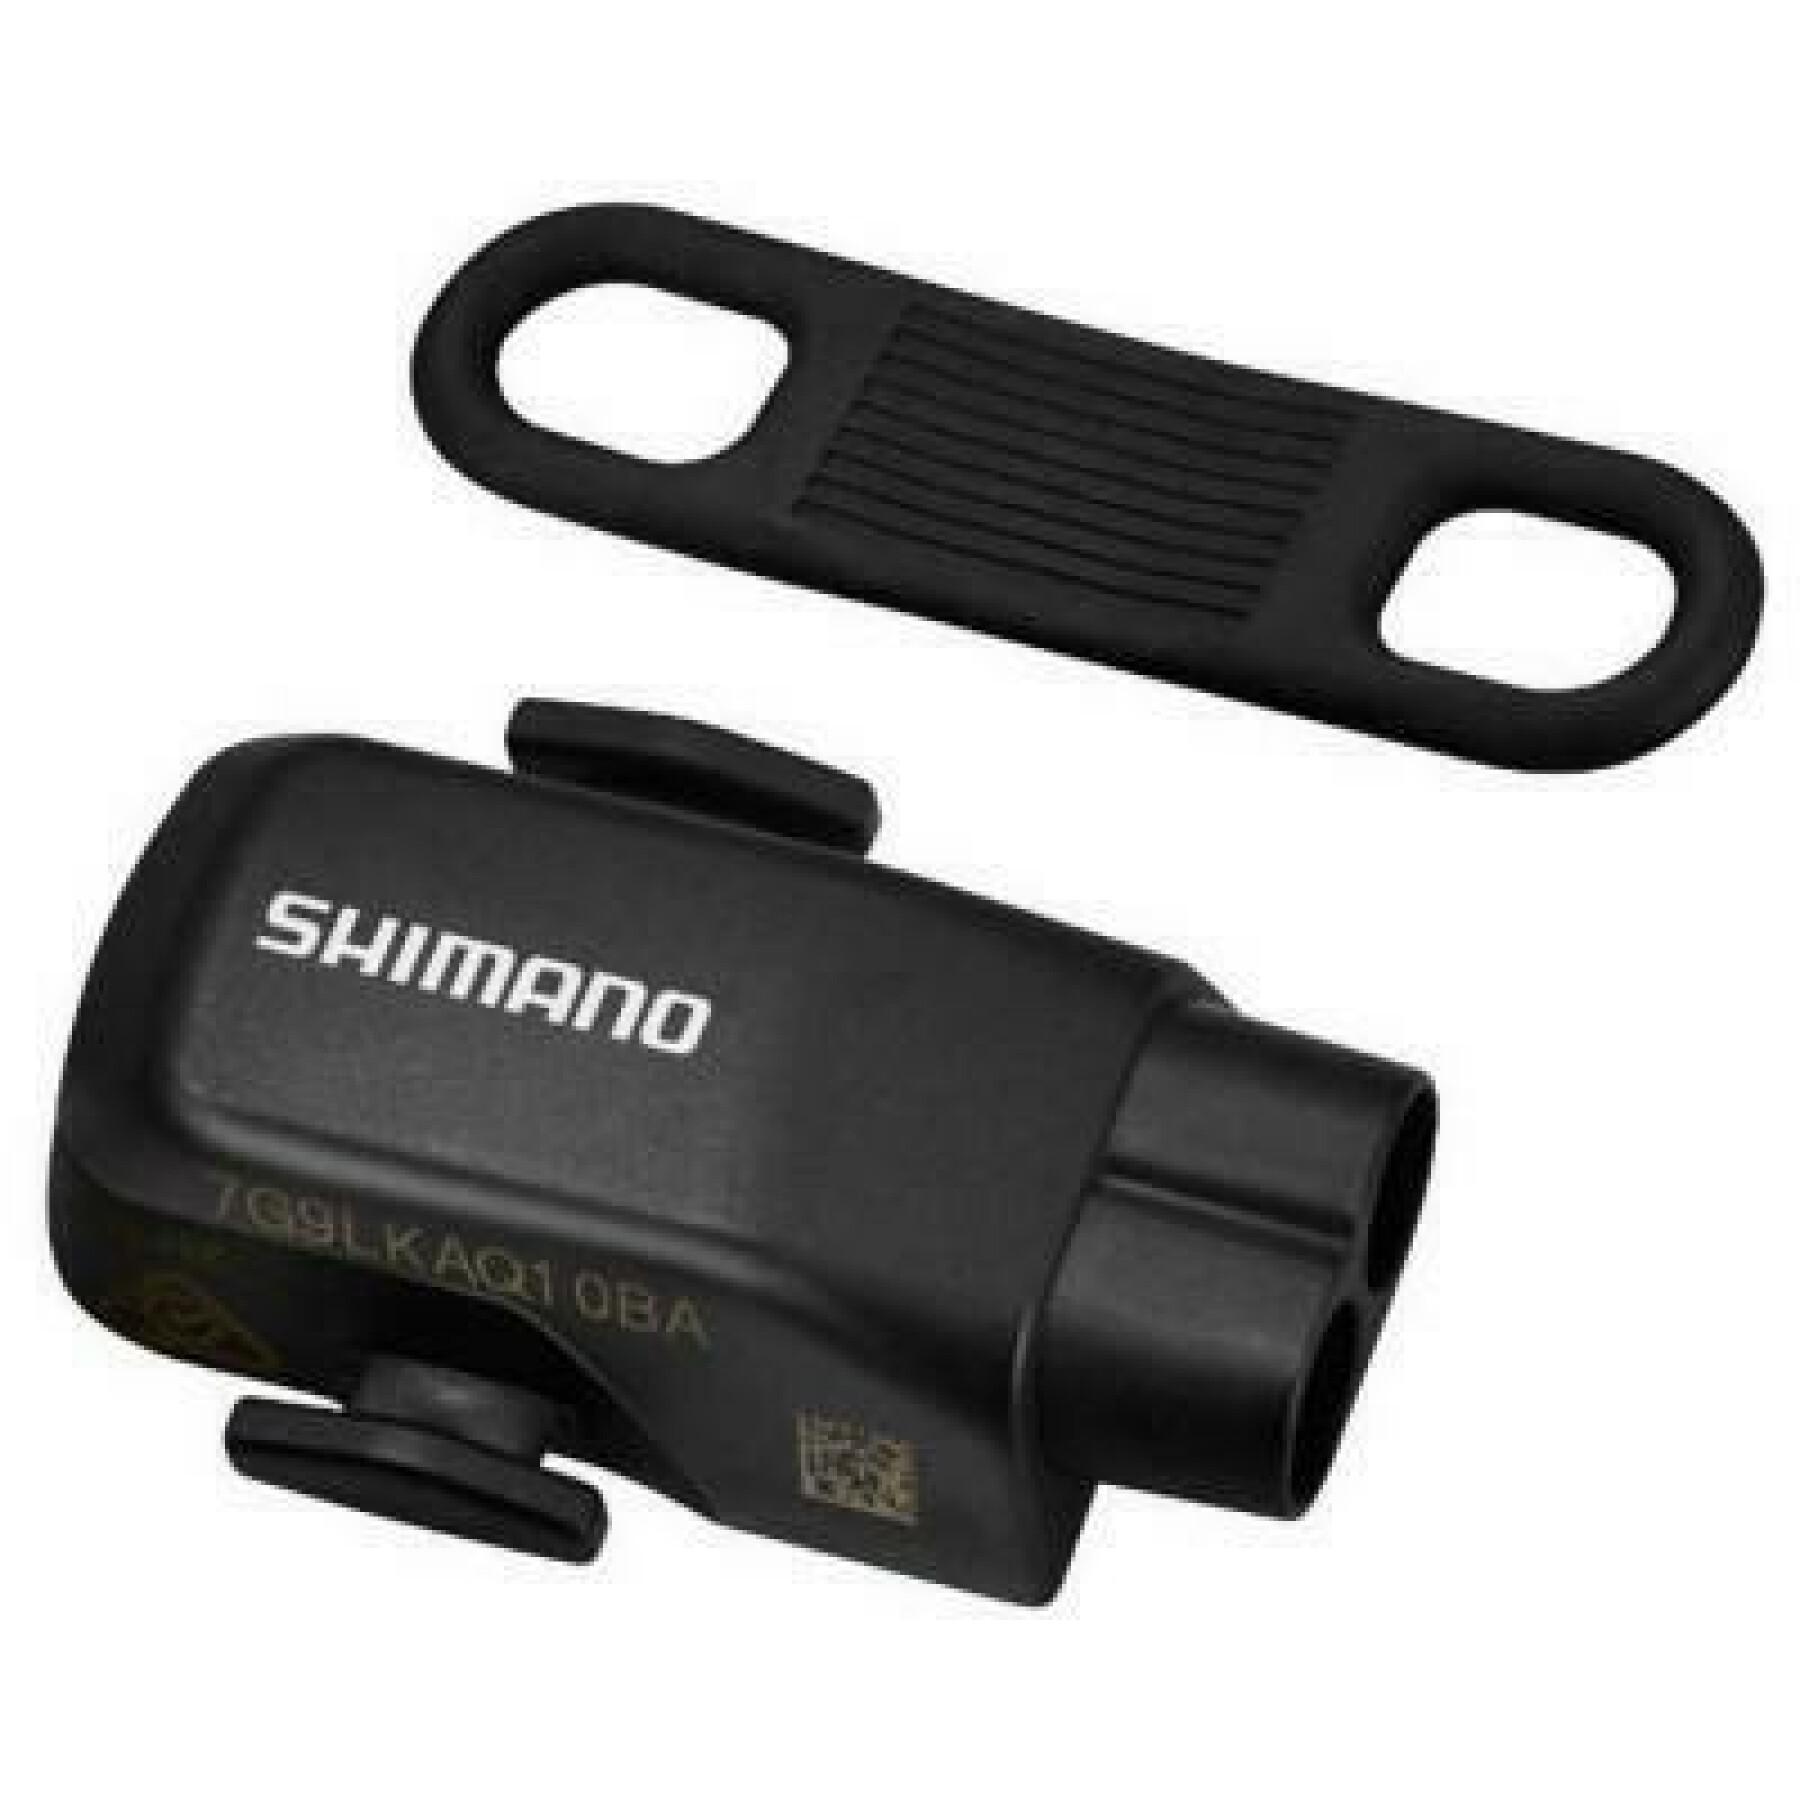 Wireless transmission unit with connections Shimano ew-wu101 pour dura ace/ultegra Di2